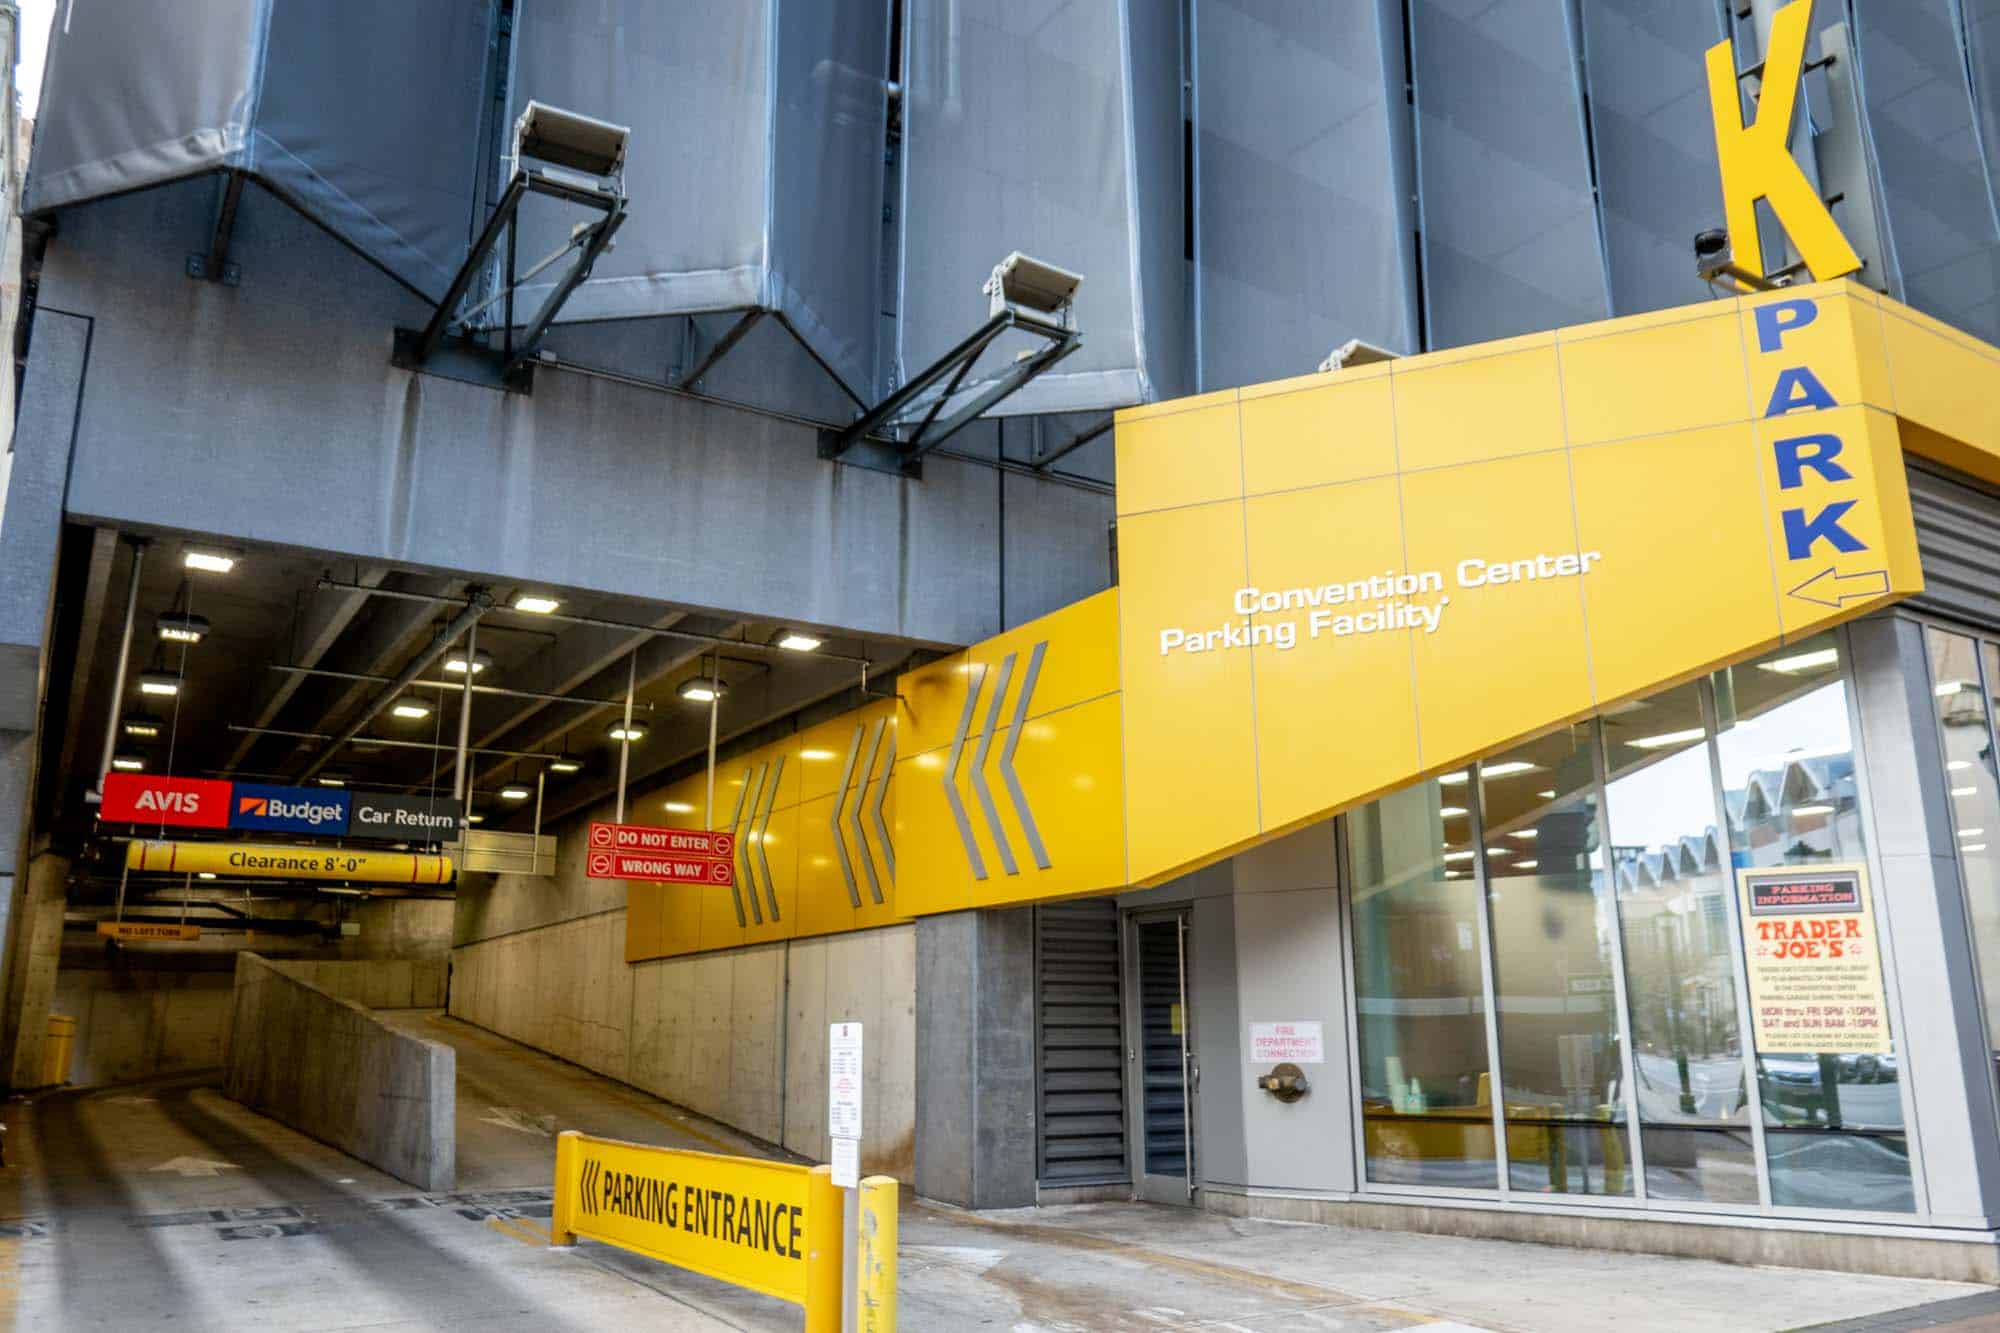 Bright yellow sign on parking garage entrance